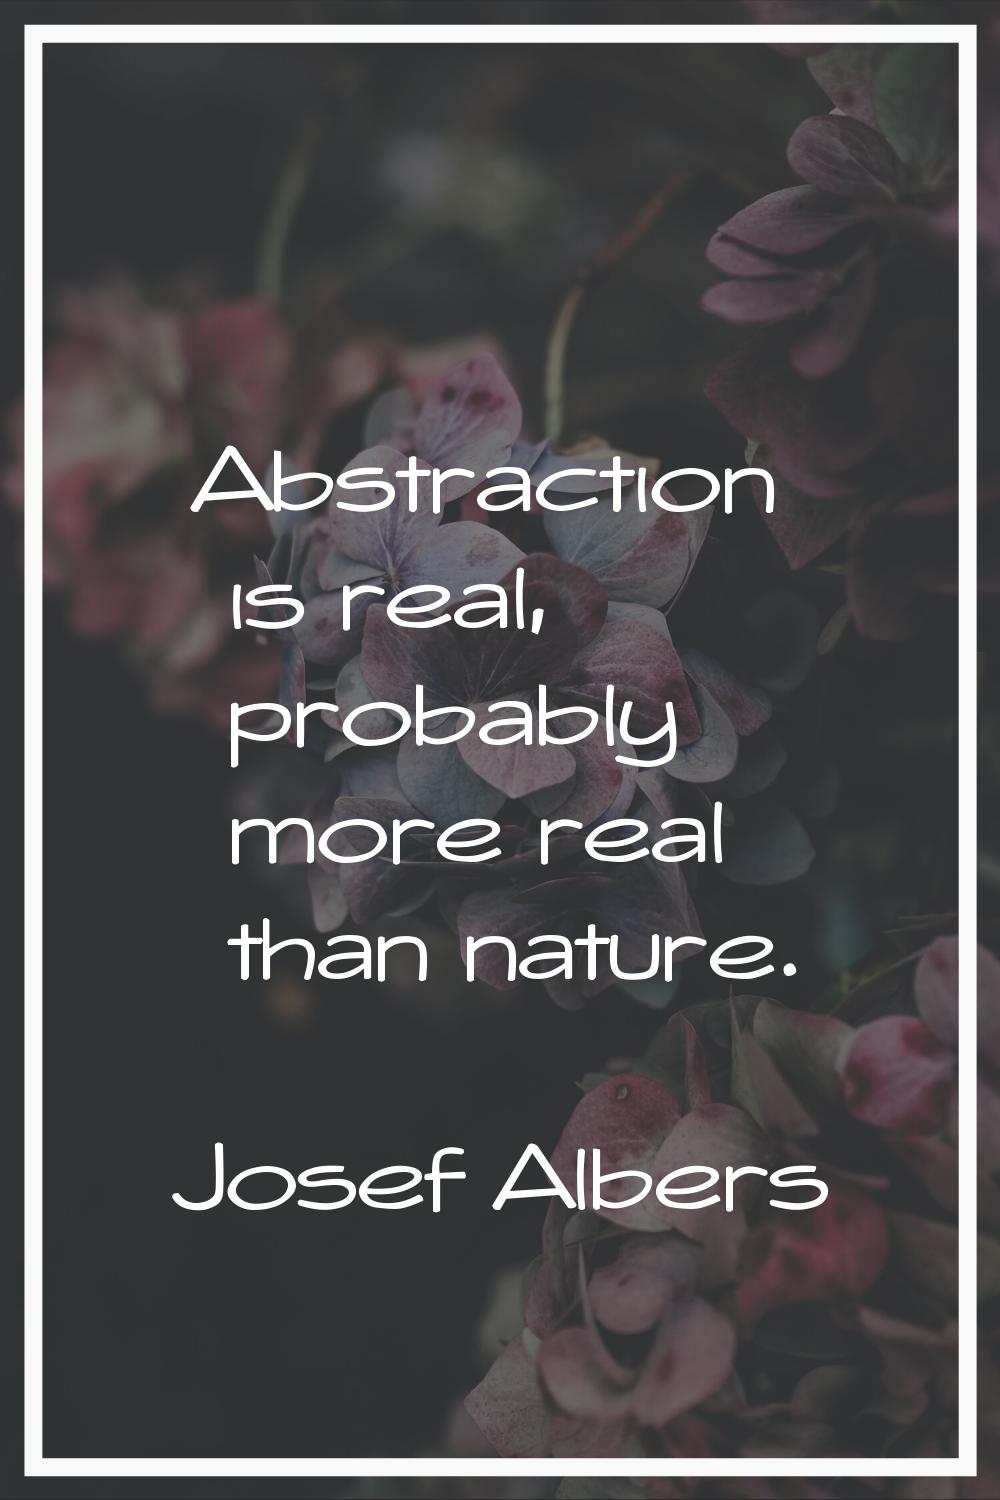 Abstraction is real, probably more real than nature.